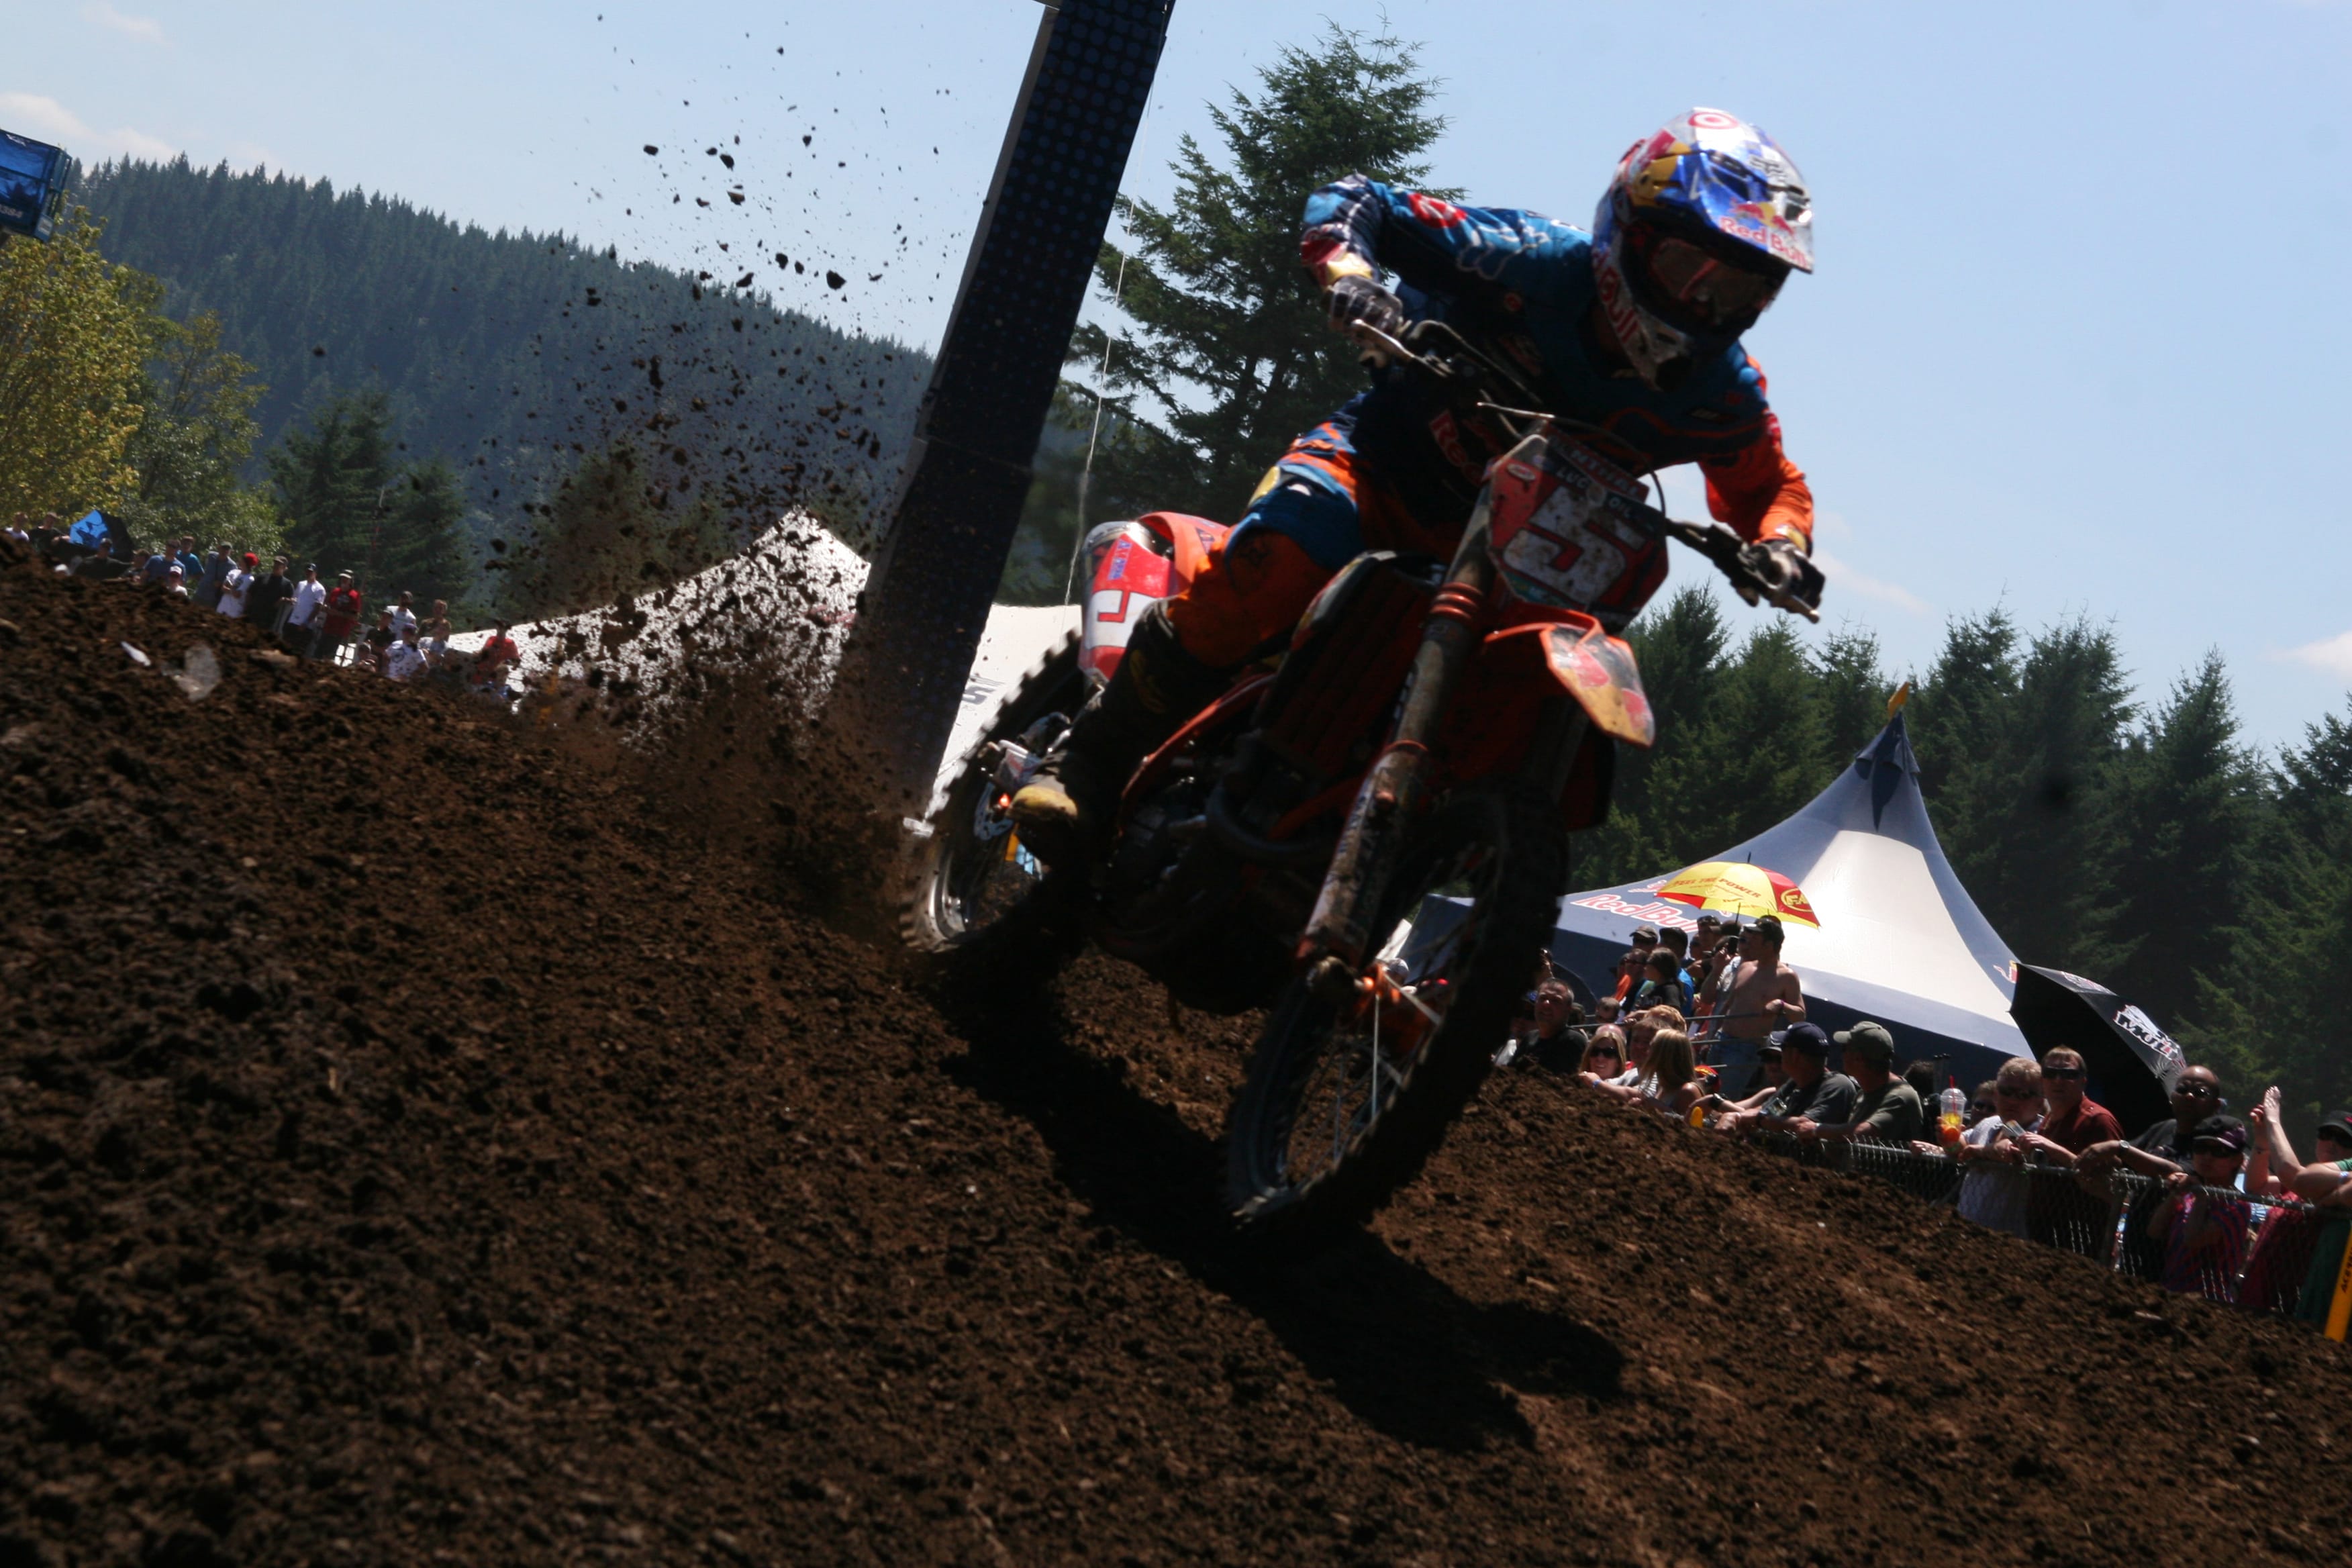 The 2012 AMA Washougal National featured a ton of action on the dirt and in the air Saturday, at Washougal Motocross Park.